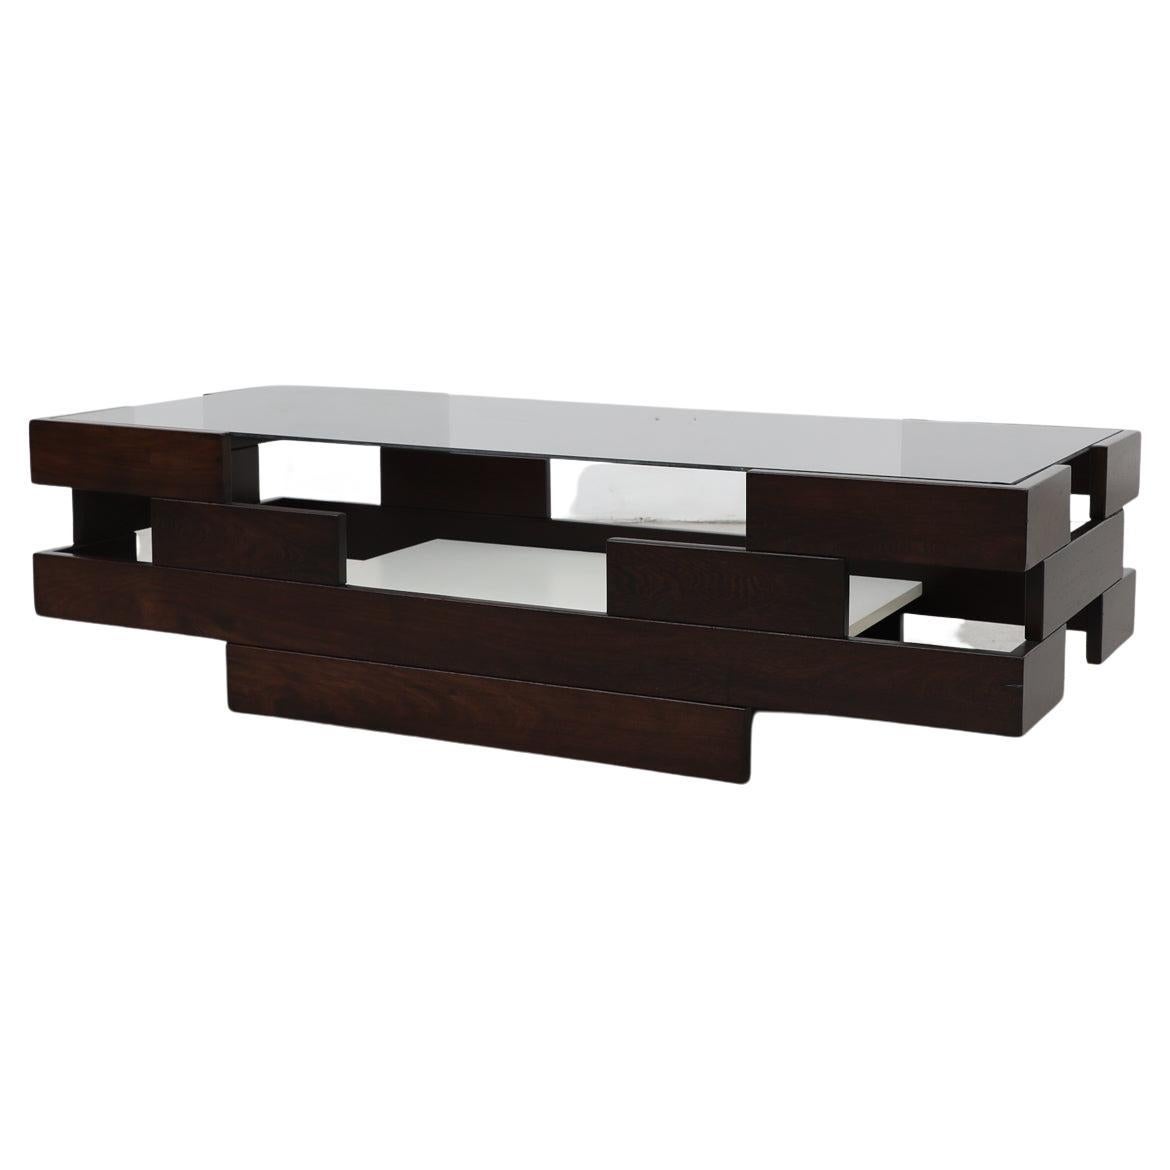 Mid-Century Modern, white laminate shelf, smoked glass top, geometric coffee table with architectural wenge frame. Glass has some wear, such as chips and scratches, and is in its original state. There is one long 1.5